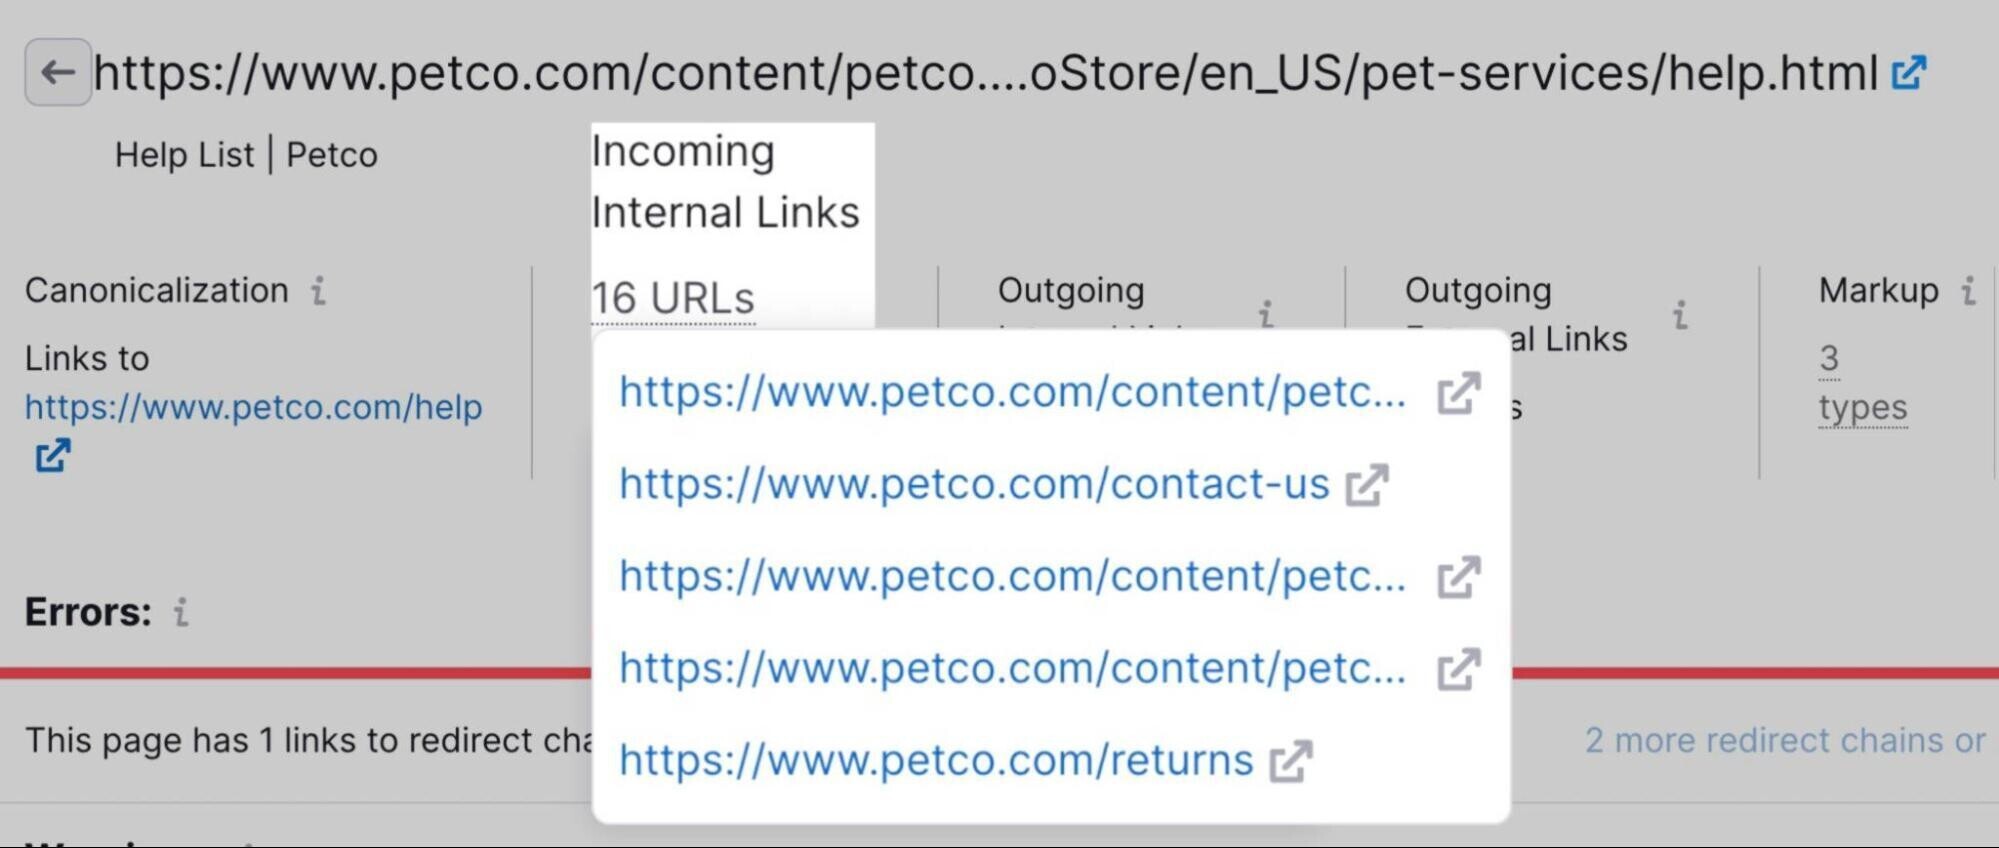 "Incoming Internal Links" section in Site Audit